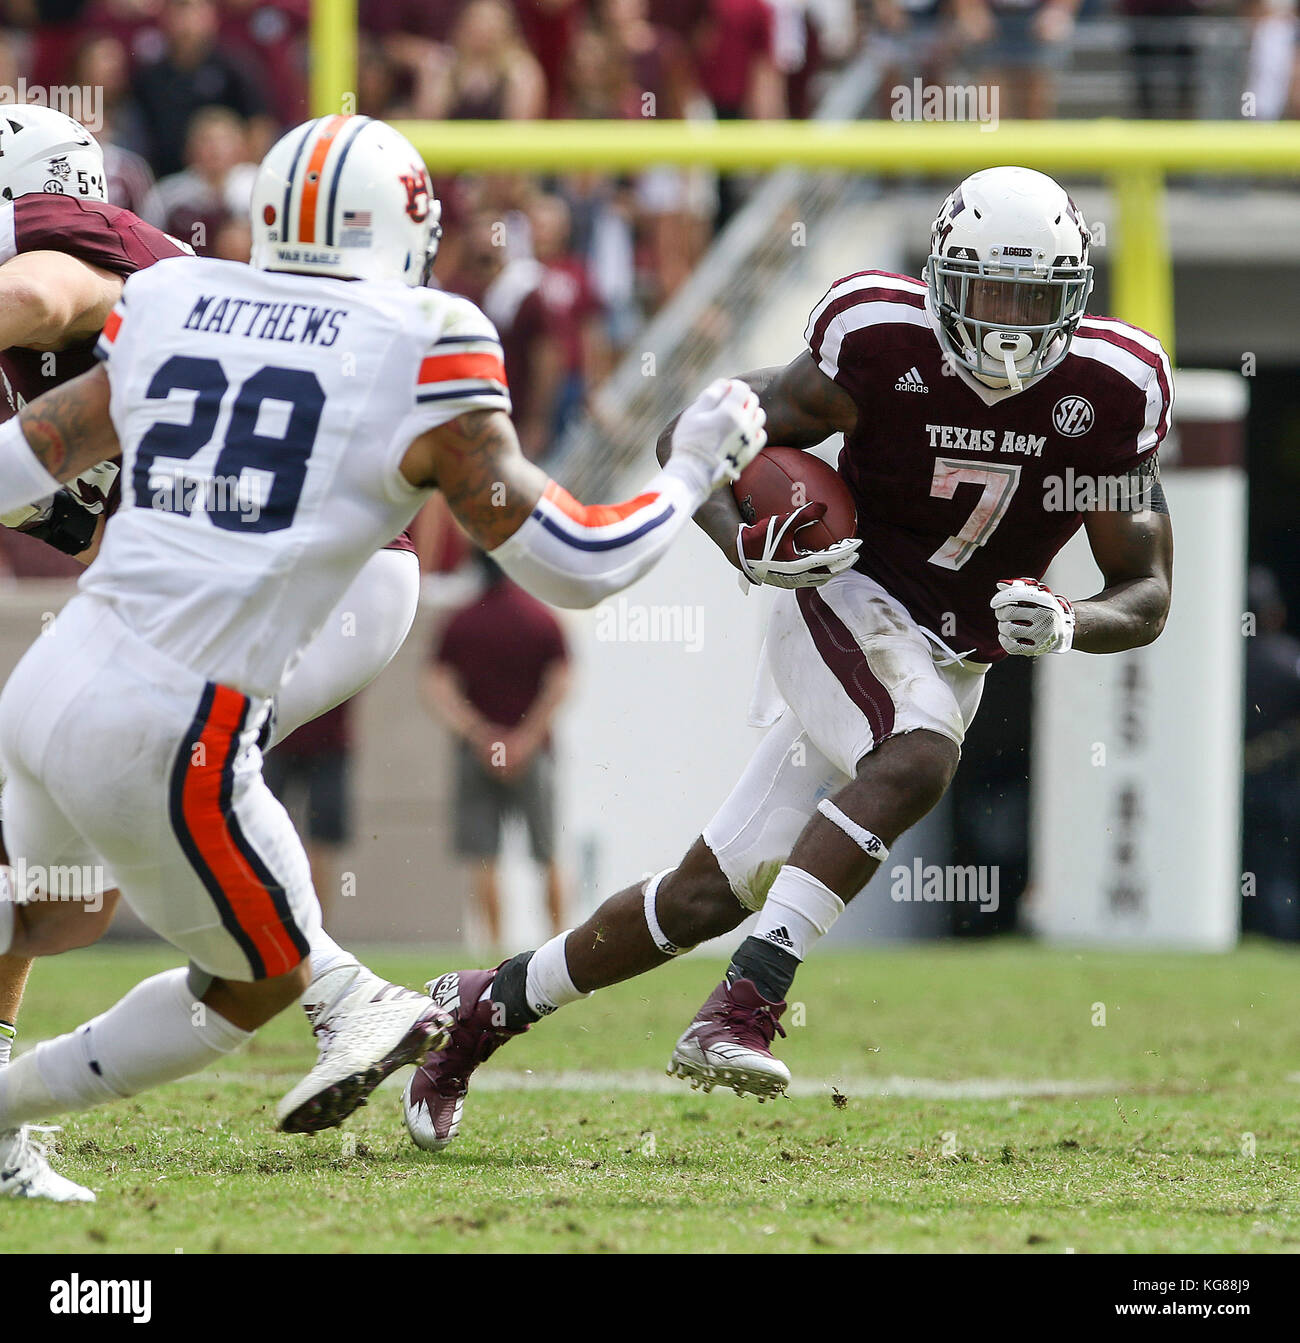 November 4, 2017: Texas A&M Aggies running back Keith Ford (7) rushes for yards in the third quarter during the NCAA football game between the Auburn Tigers and the Texas A&M Aggies at Kyle Field in College Station, TX; John Glaser/CSM. Stock Photo